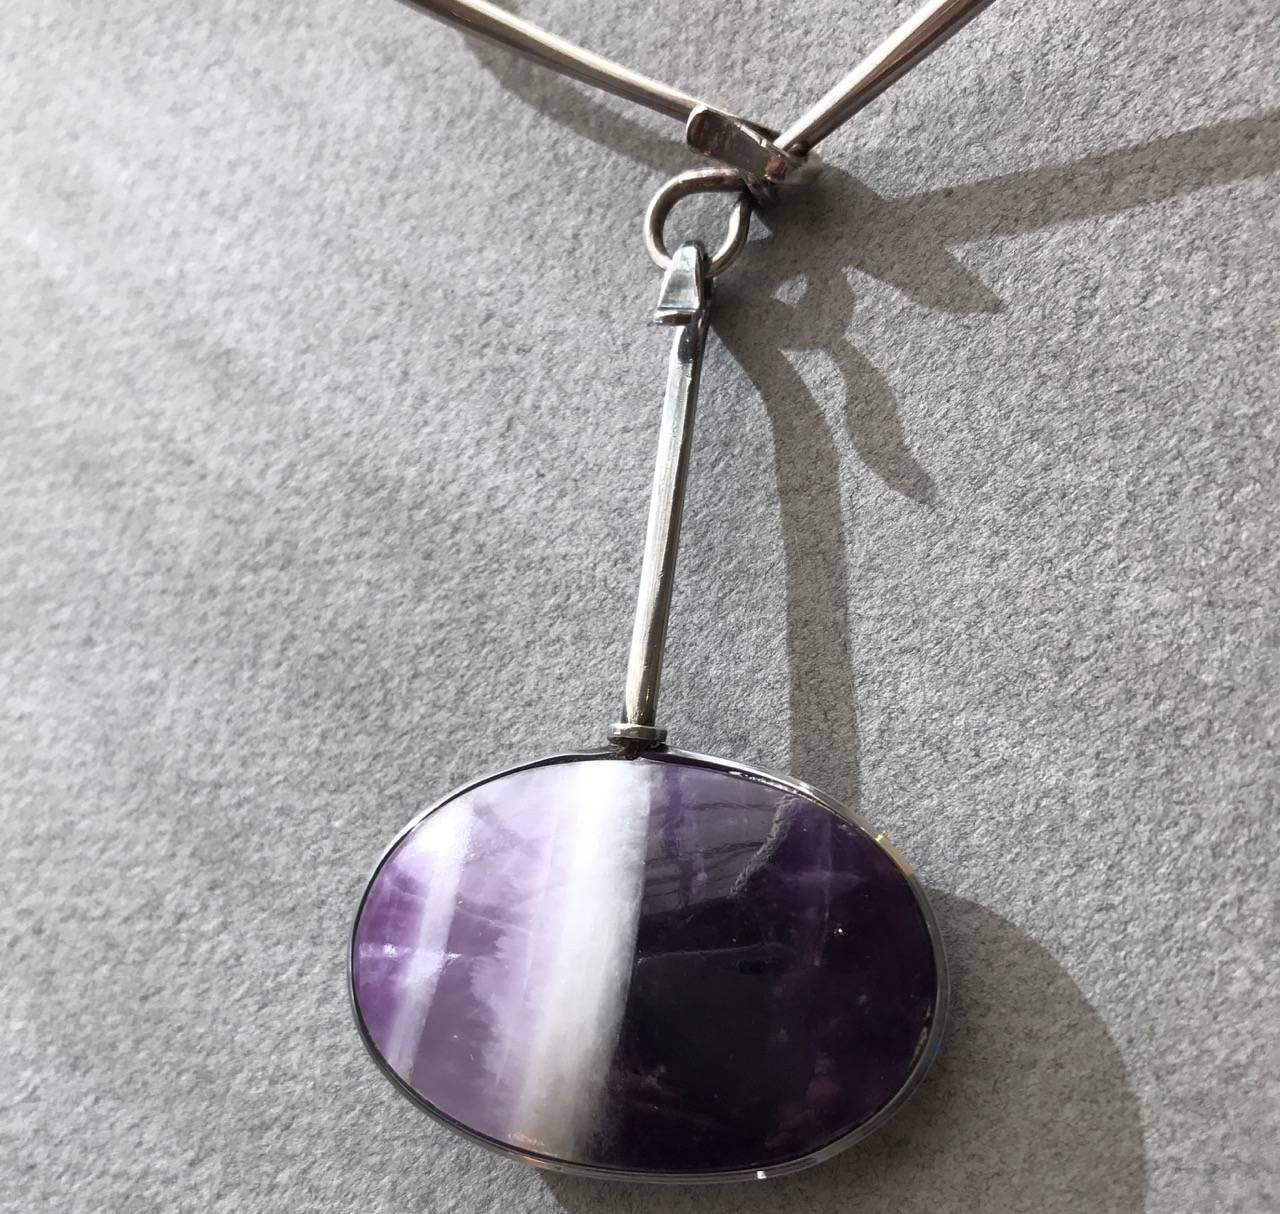 Georg Jensen Sterling Silver Neckring with Amethyst drop No. 133/174 By Vivianna Torun 

Complimentary gift box included with purchase.
Additional Drops are available, please inquire.

A similar example can be seen in the book, GEORGE JENSEN JEWELRY